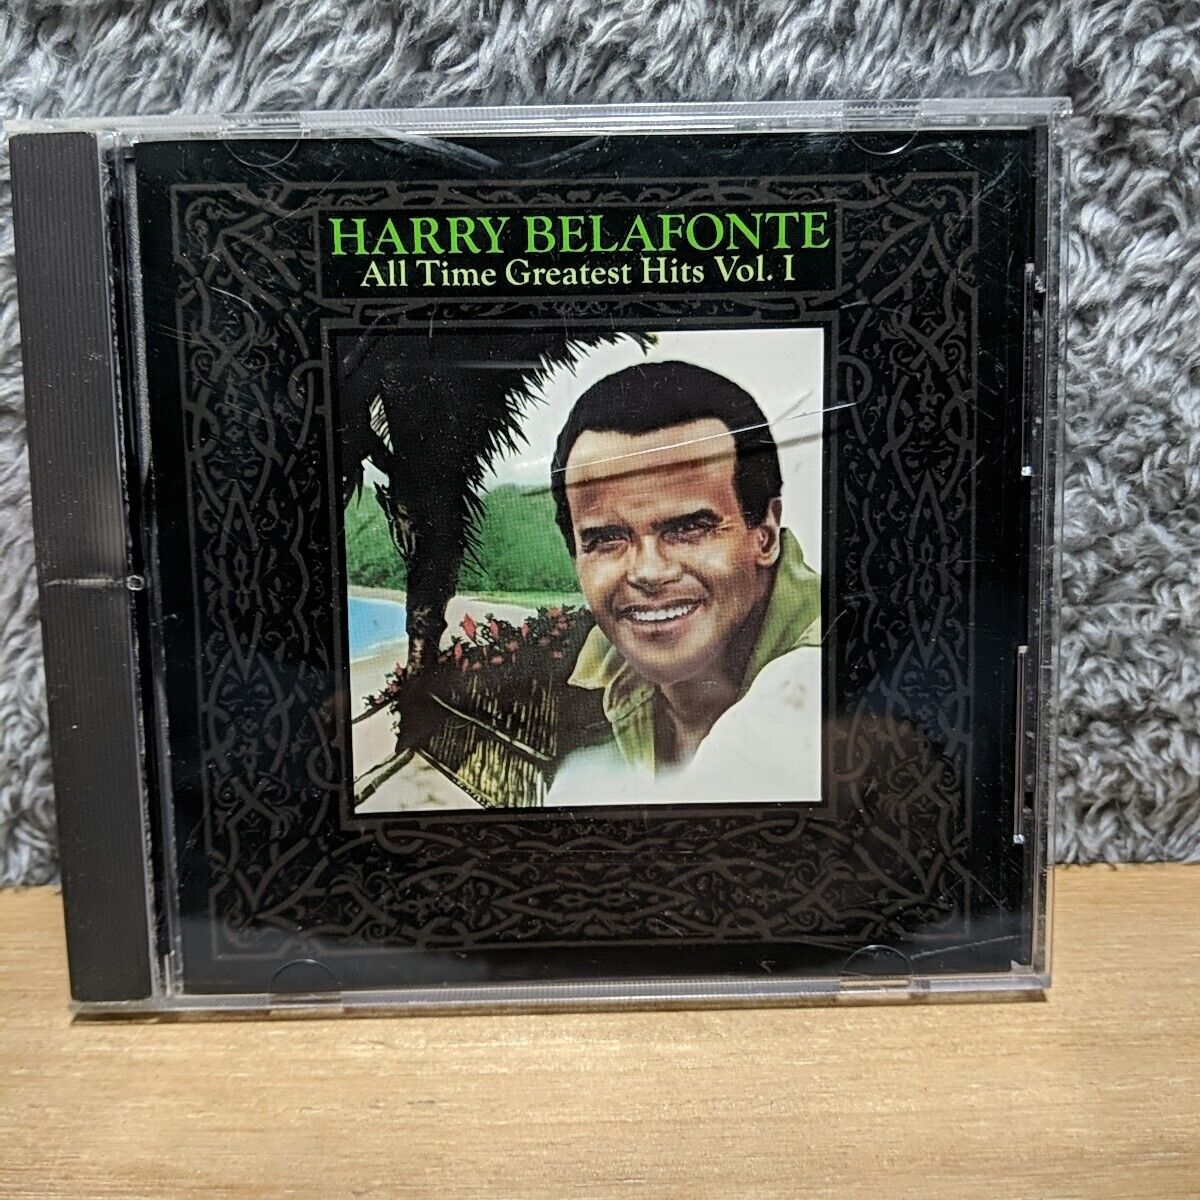 All Time Greatest Hits, Vol. 1 by Harry Belafonte (CD, Oct-1990, RCA)